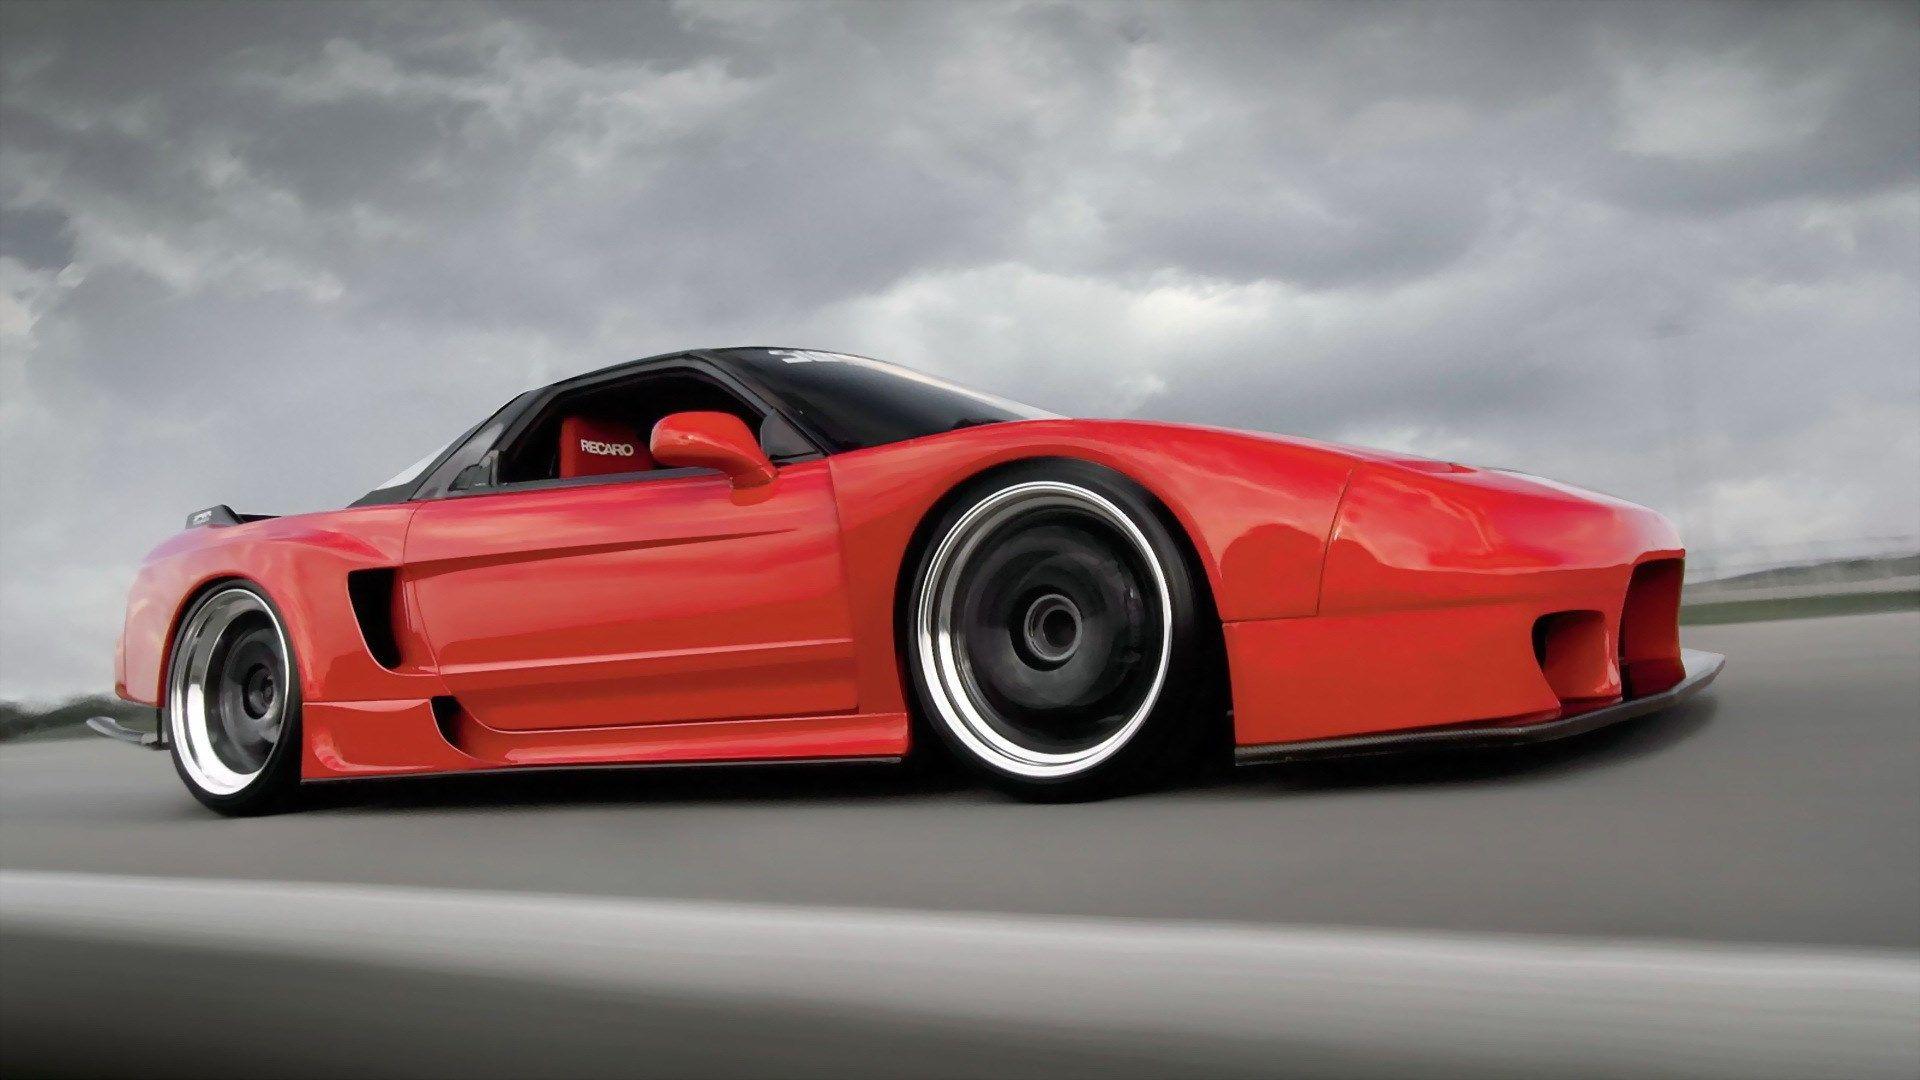 Honda Nsx Rear Need For Speed 2020 4k Sony Xperia  iPhone Wallpapers  Free Download